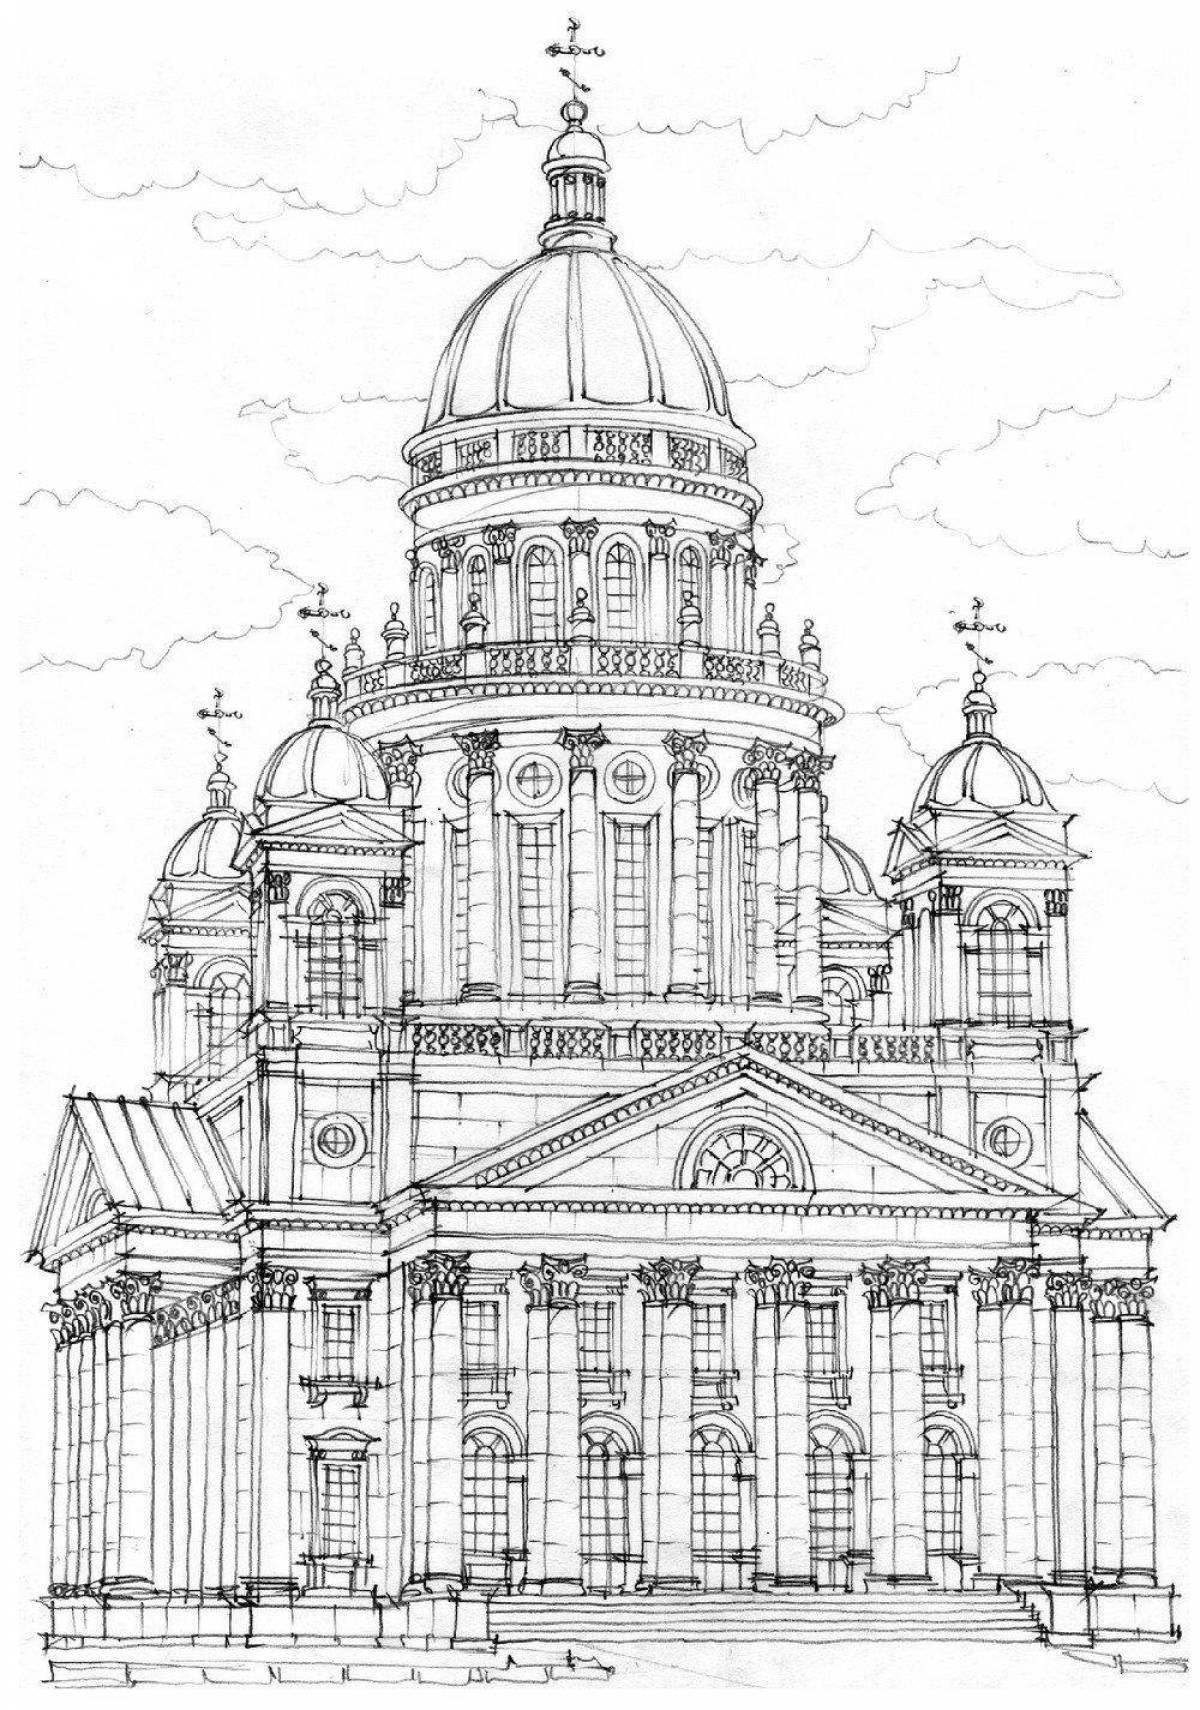 Exquisite St. Isaac's Cathedral coloring book